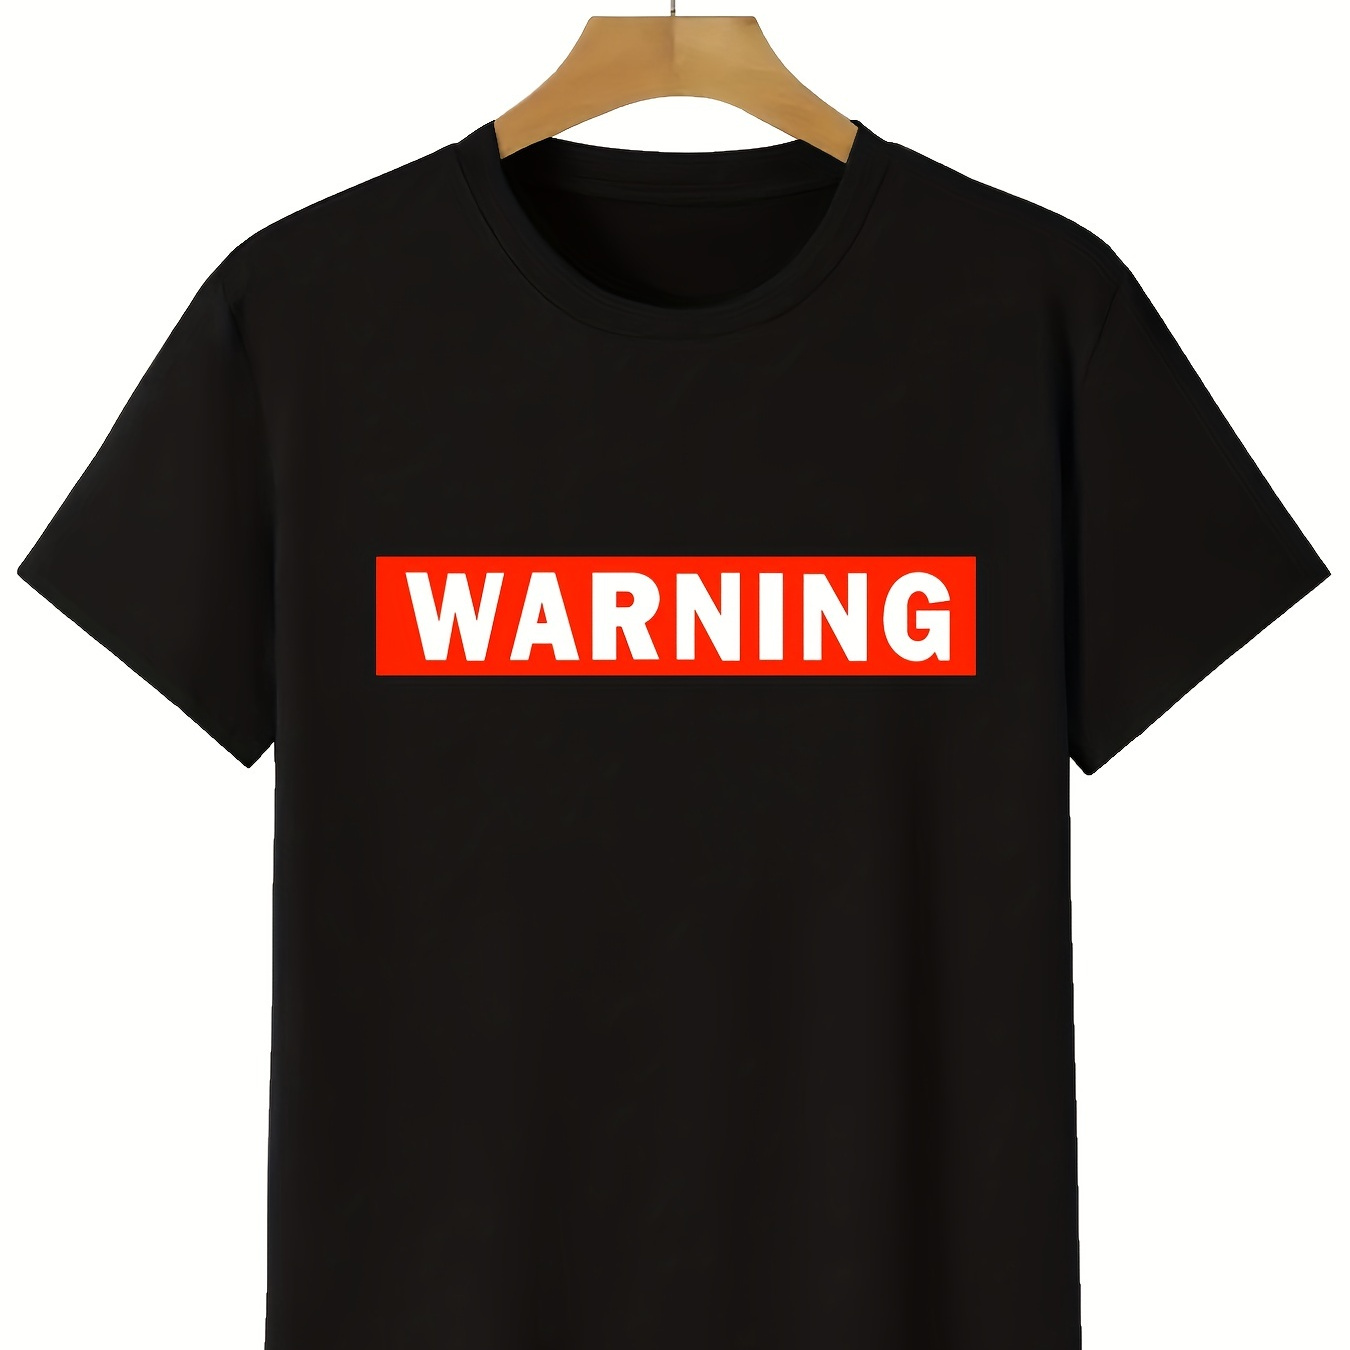 

Warning Letter Graphic Print Men's Creative Top, Casual Short Sleeve Crew Neck T-shirt, Men's Clothing For Summer Outdoor